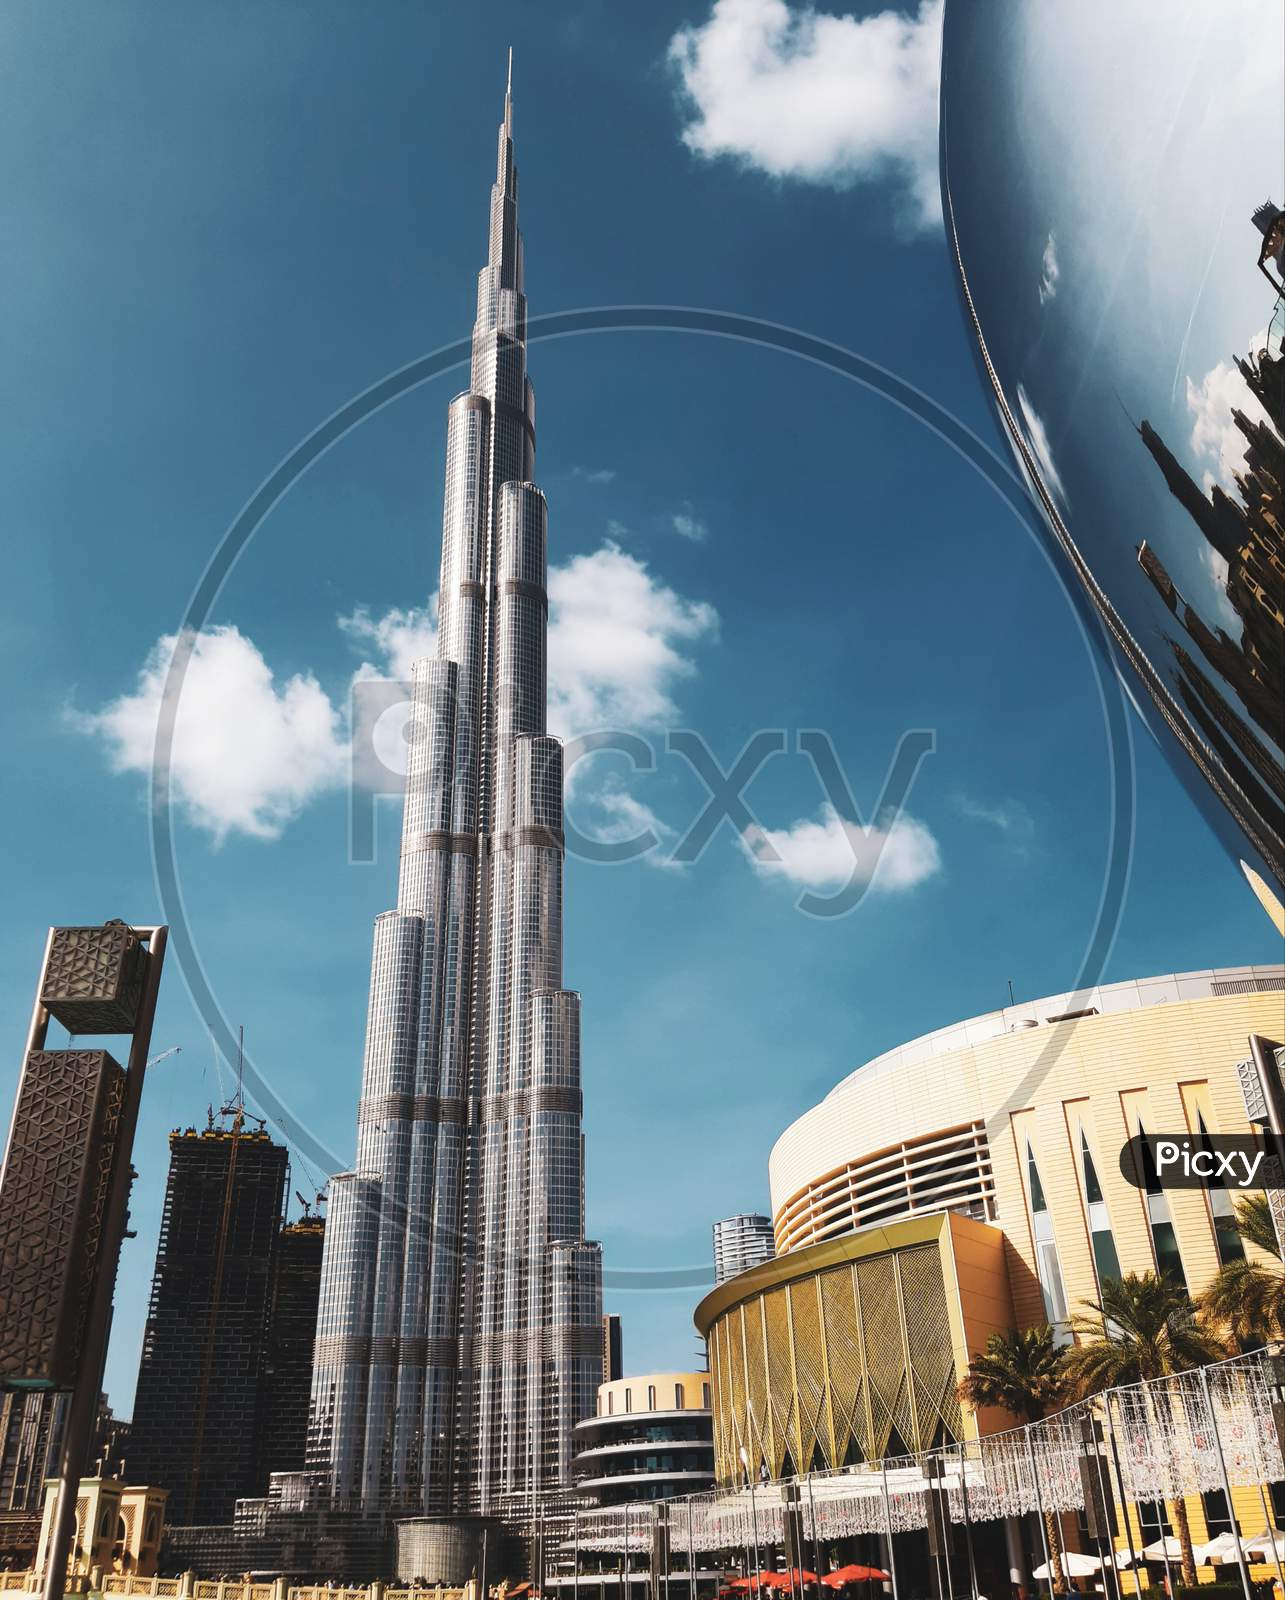 From the earth to the sky - Burj Khalifa